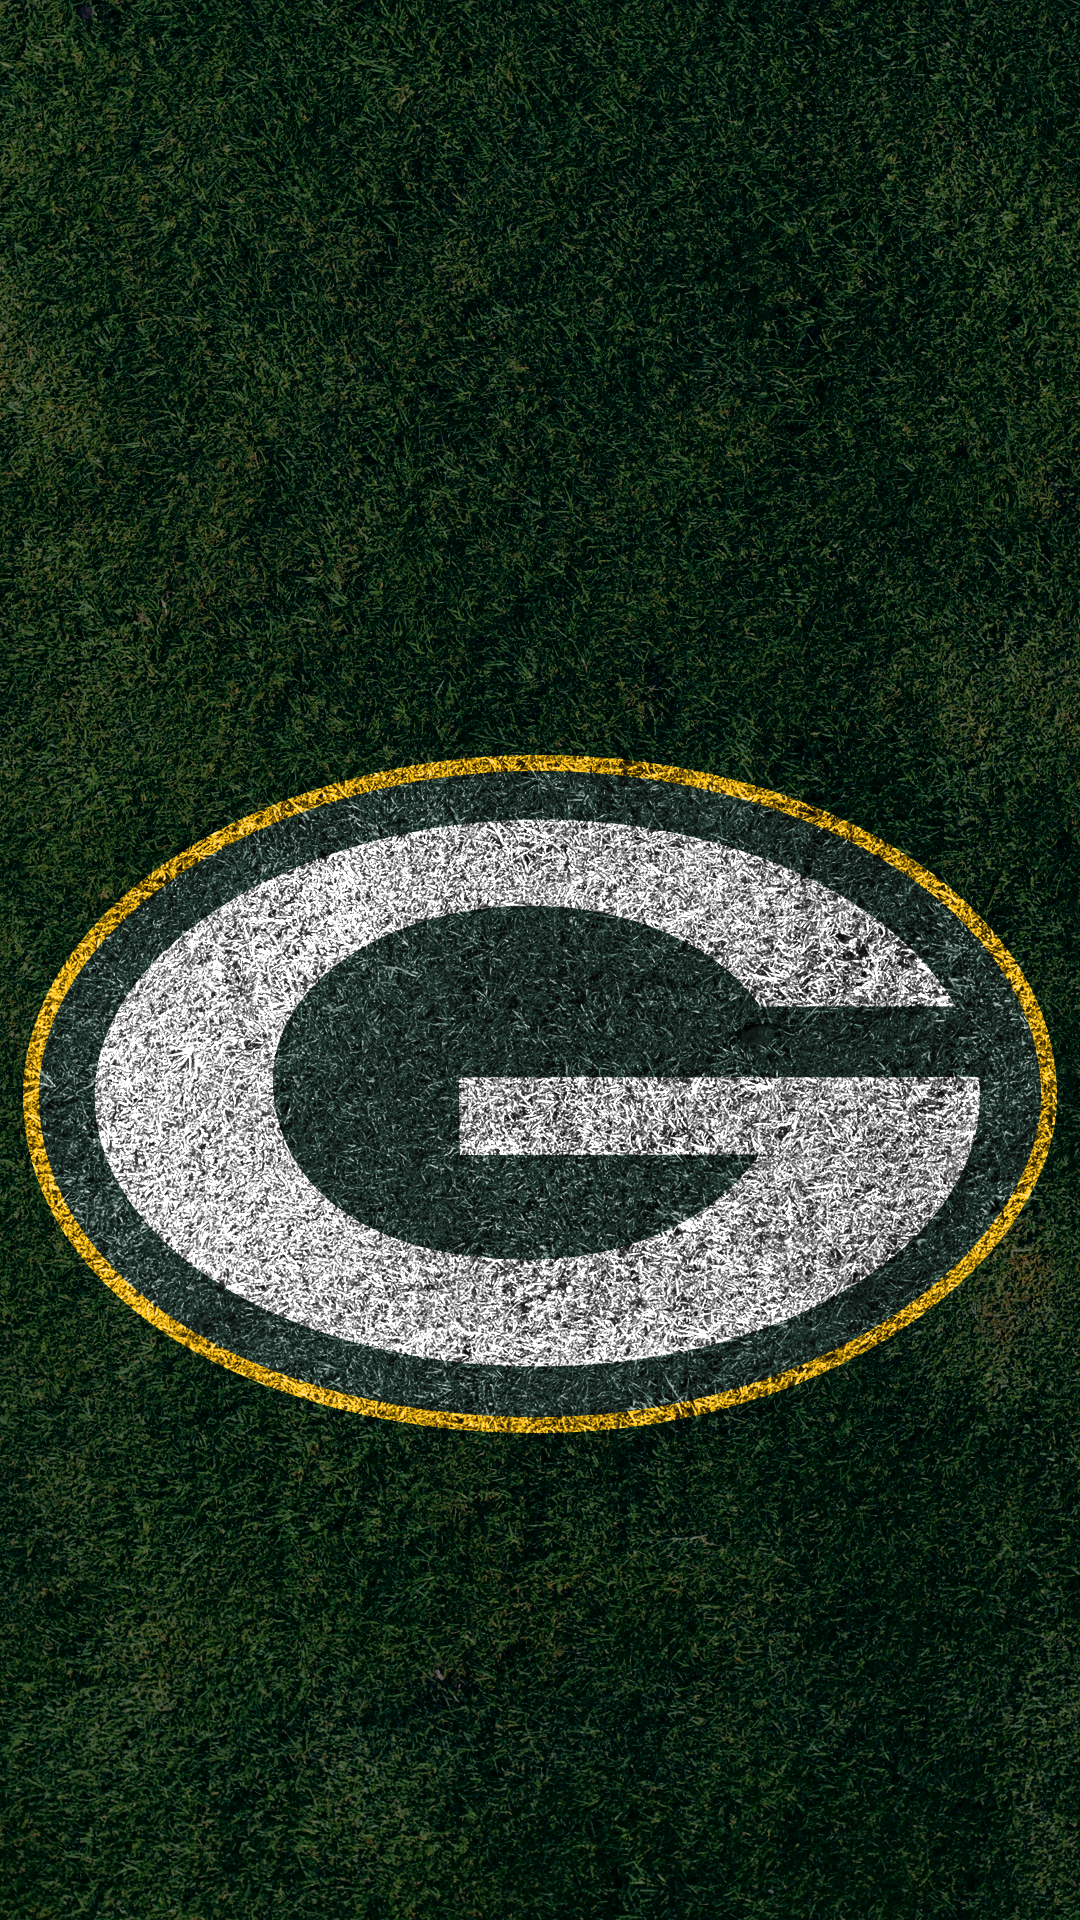 Sports/Green Bay Packers (1080x1920